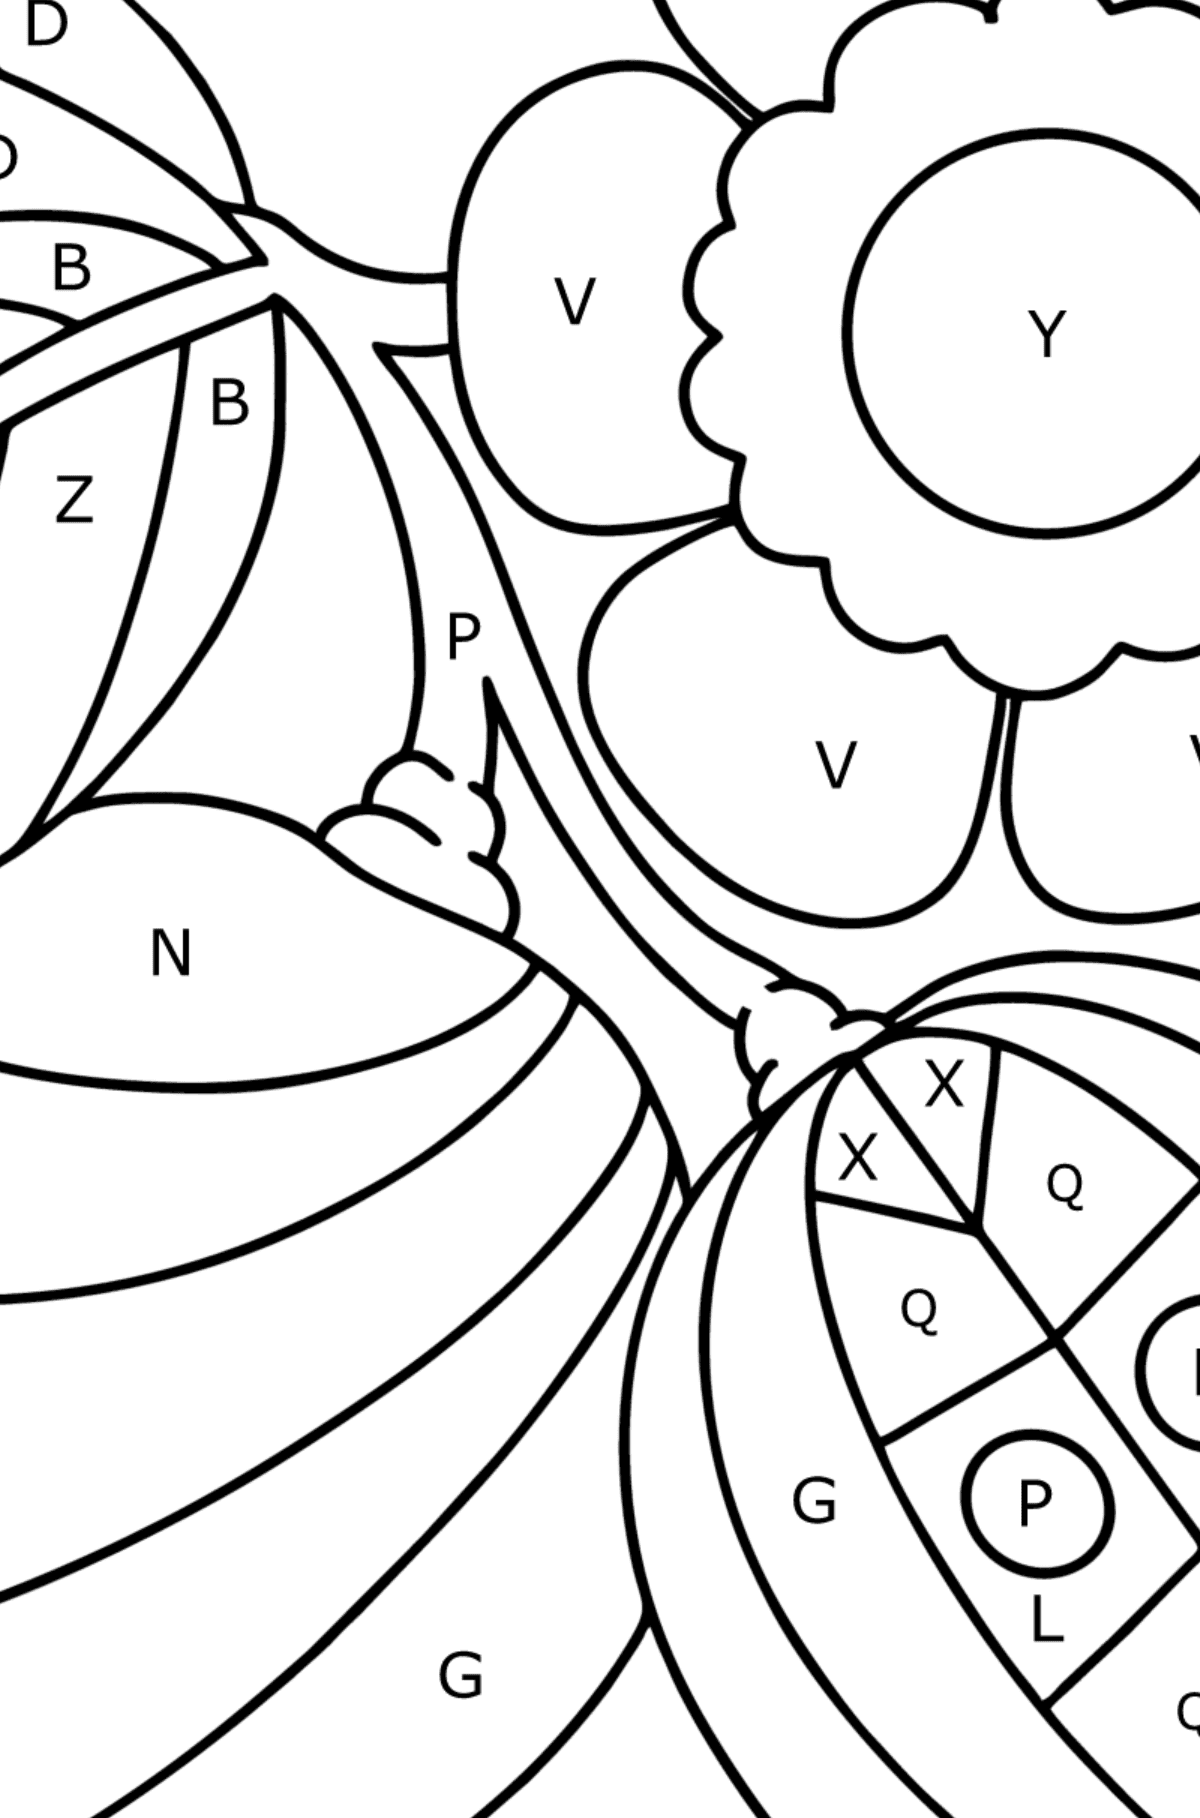 Anxiety stress relief Lemon coloring page - Coloring by Letters for Kids